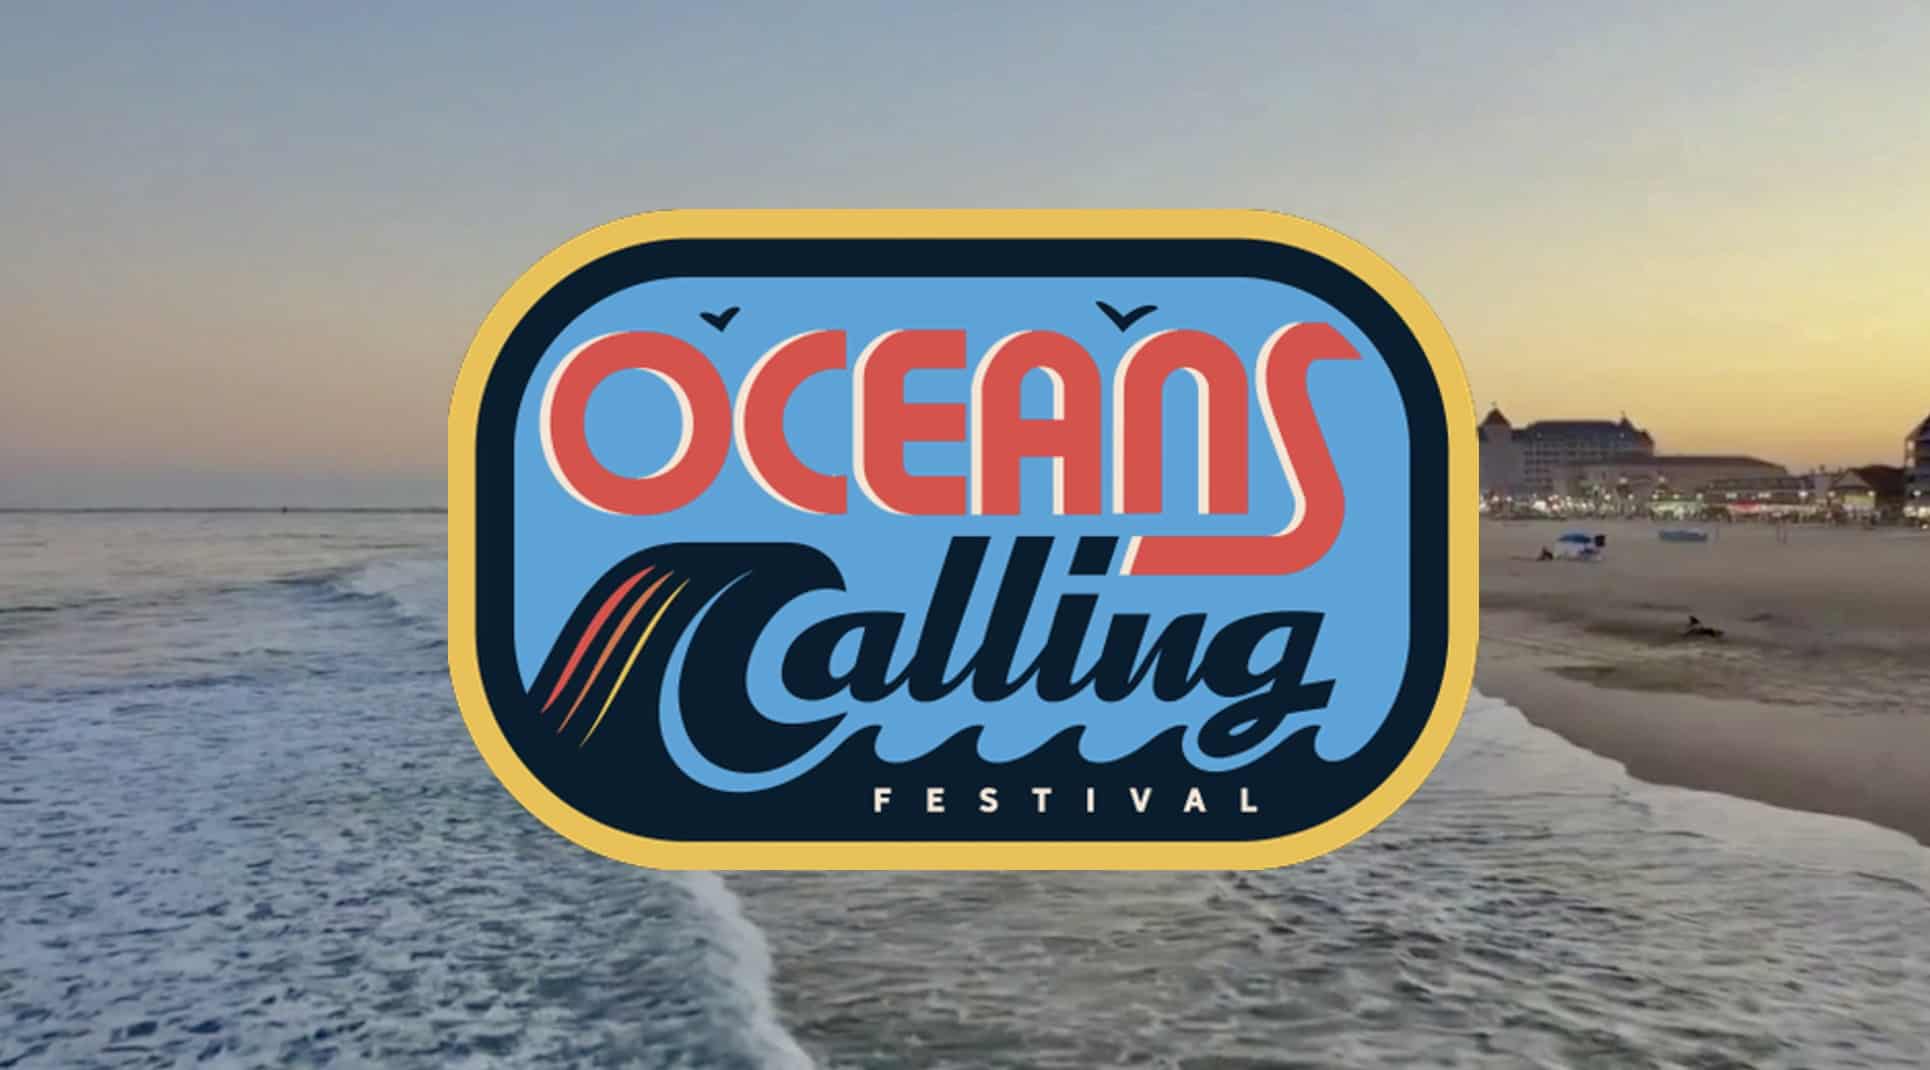 Oceans Calling festival: See the big stars coming to Ocean City